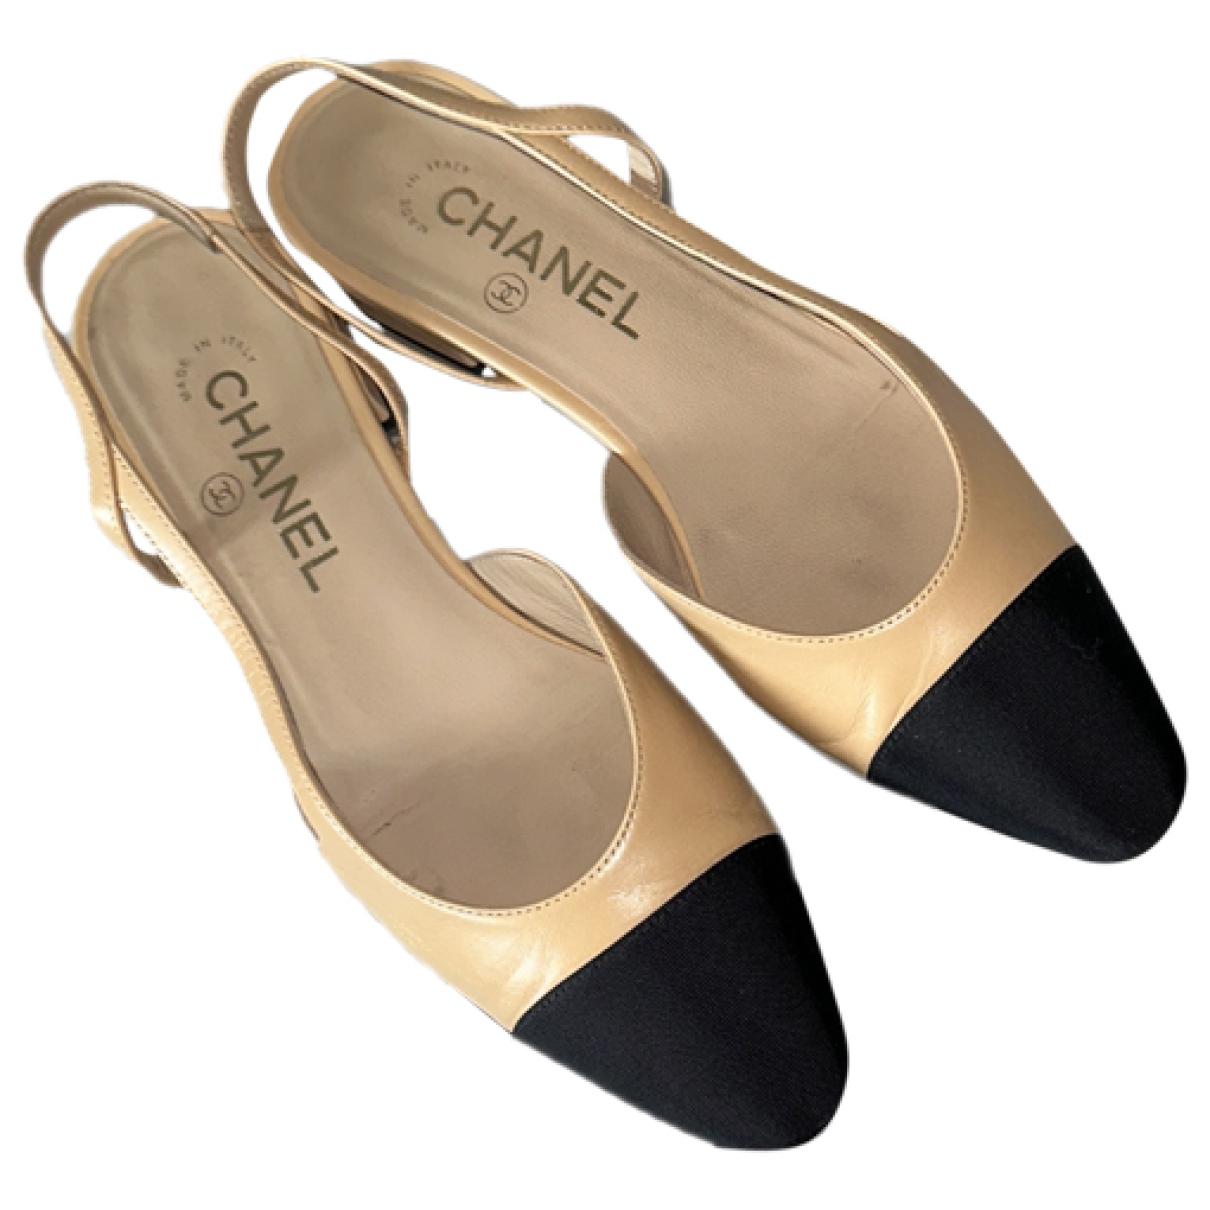 Chanel - Authenticated Slingback Ballet Flats - Leather Beige Plain for Women, Very Good Condition